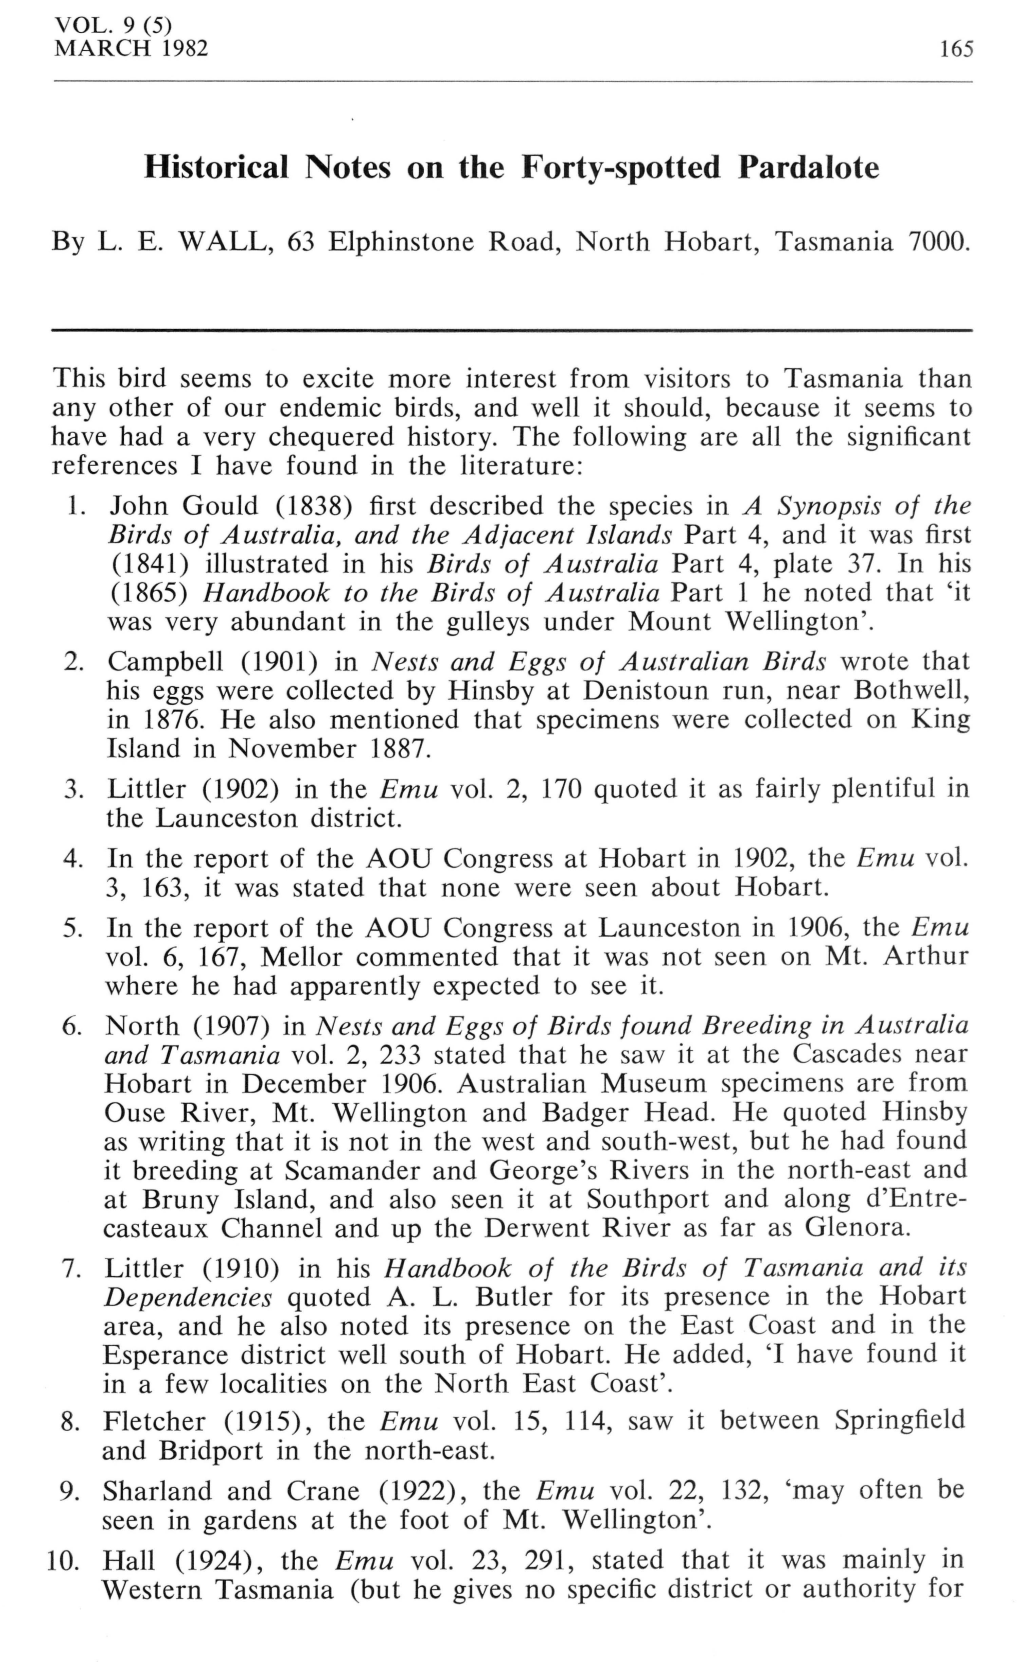 Historical Notes on the Forty-Spotted Pardalote